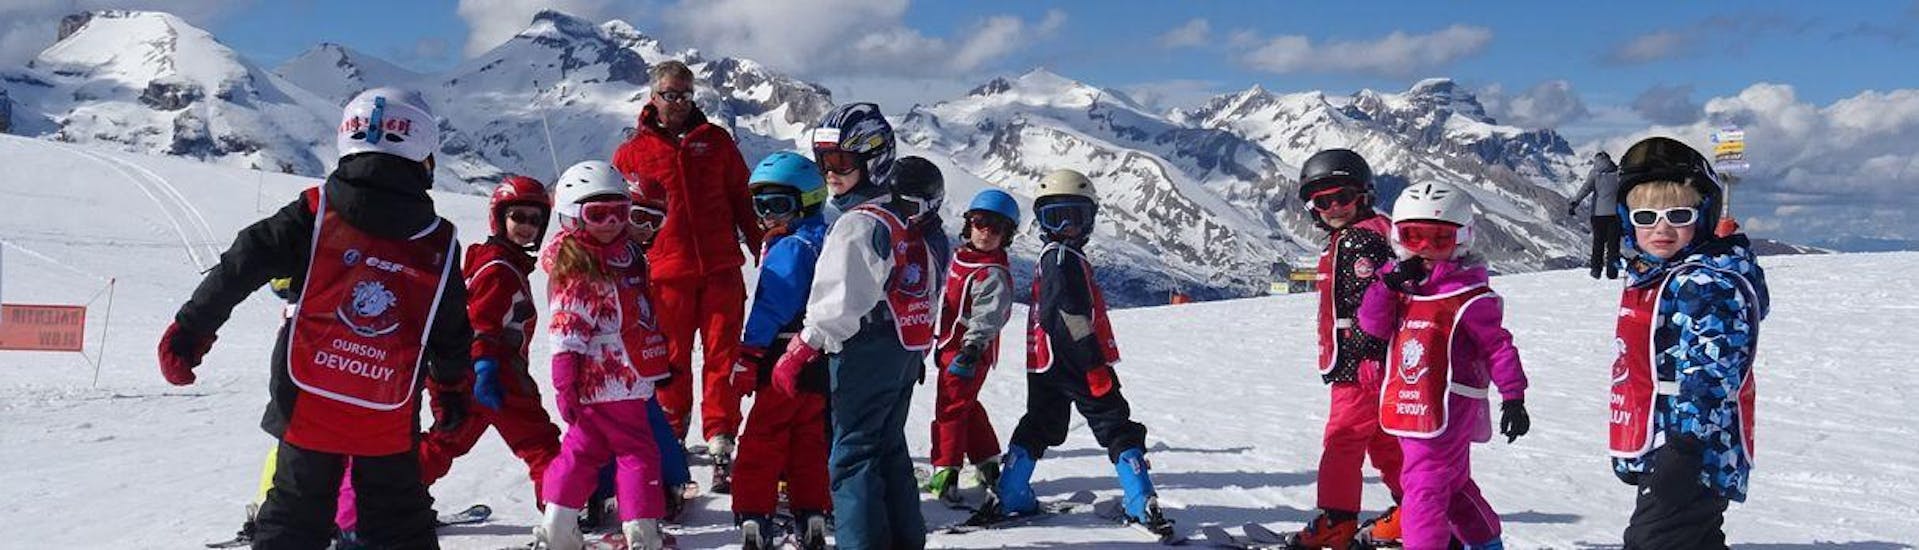 Kids are standing at the top of the slope ready to start their Kids Ski Lessons (6-12 years) - Advanced with the ski school ESF du Dévoluy.